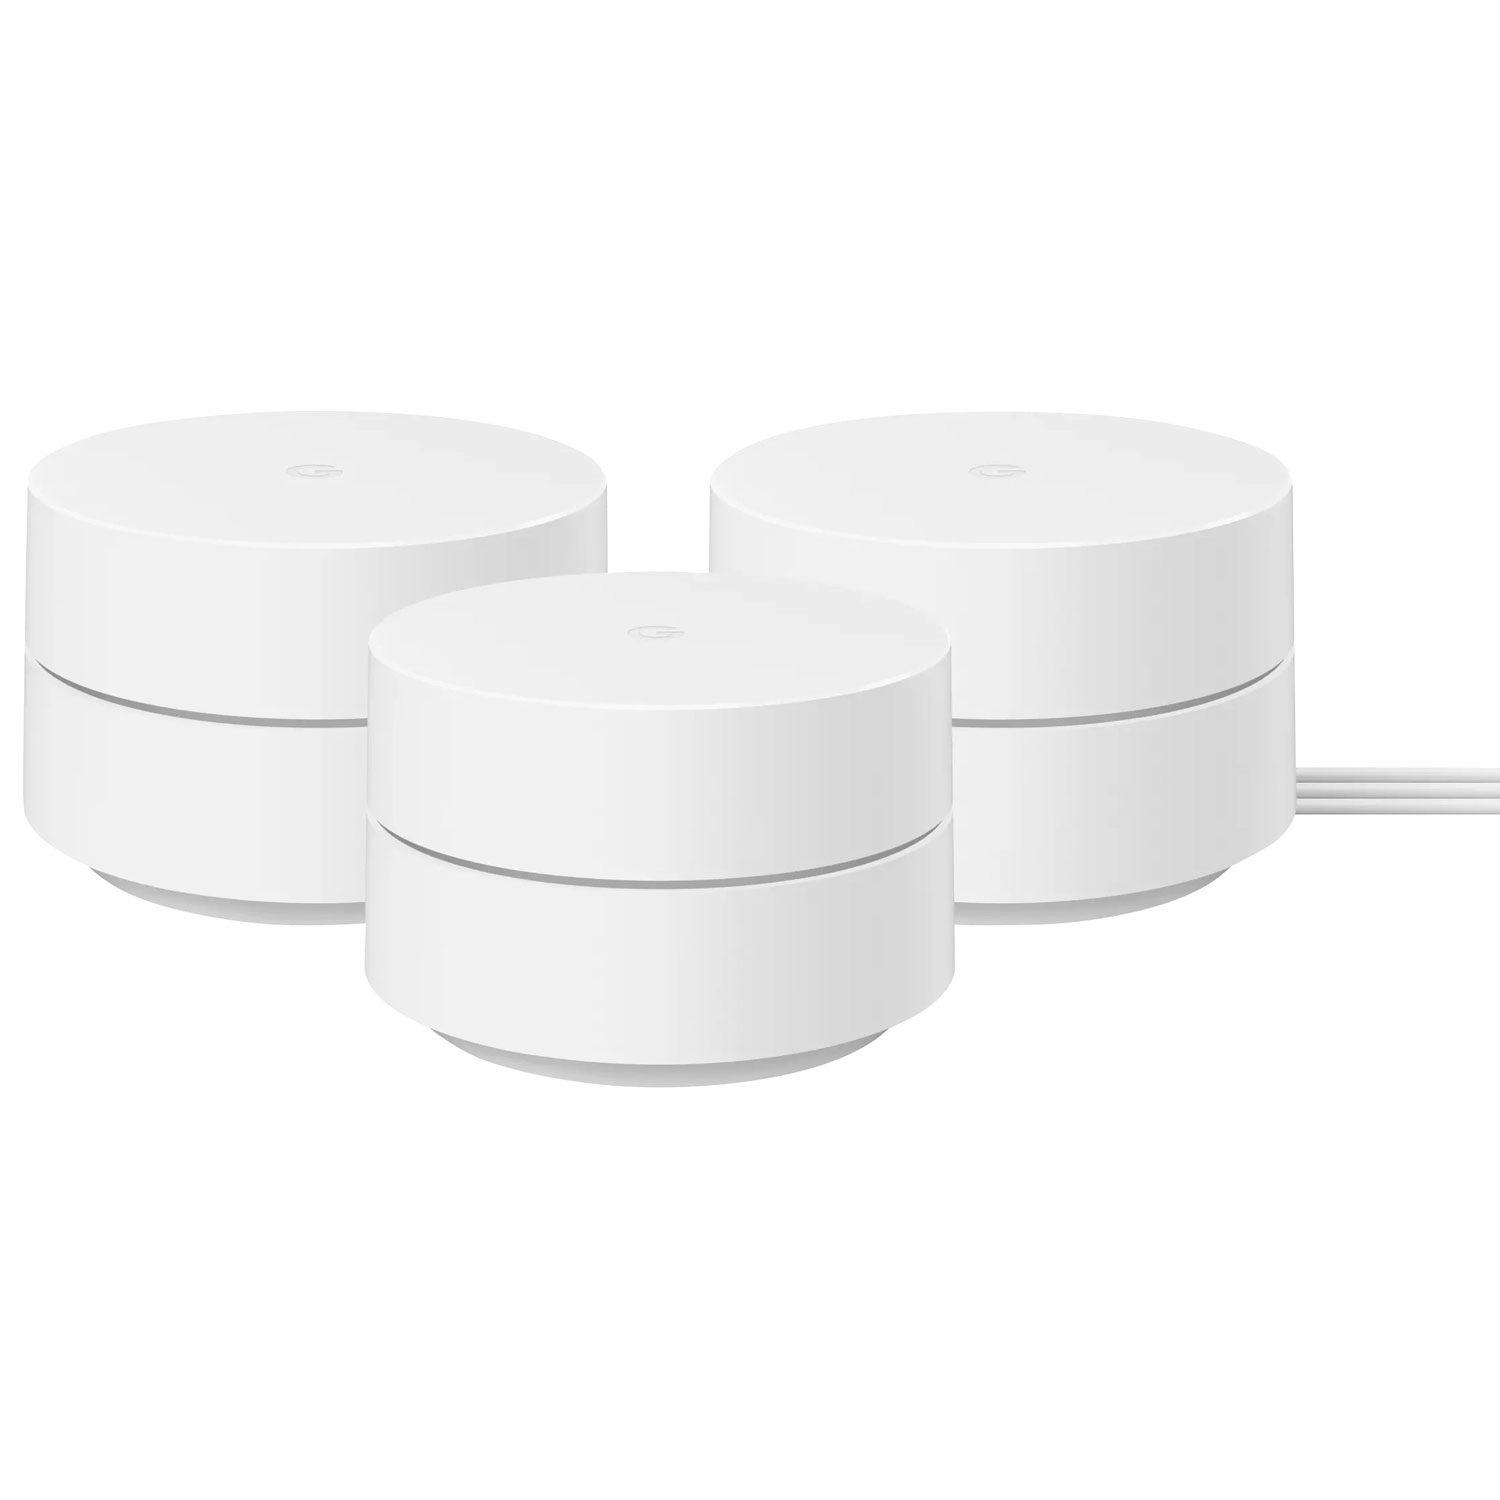 Google WiFi Router with 2 Points - Snow - 3 Pack